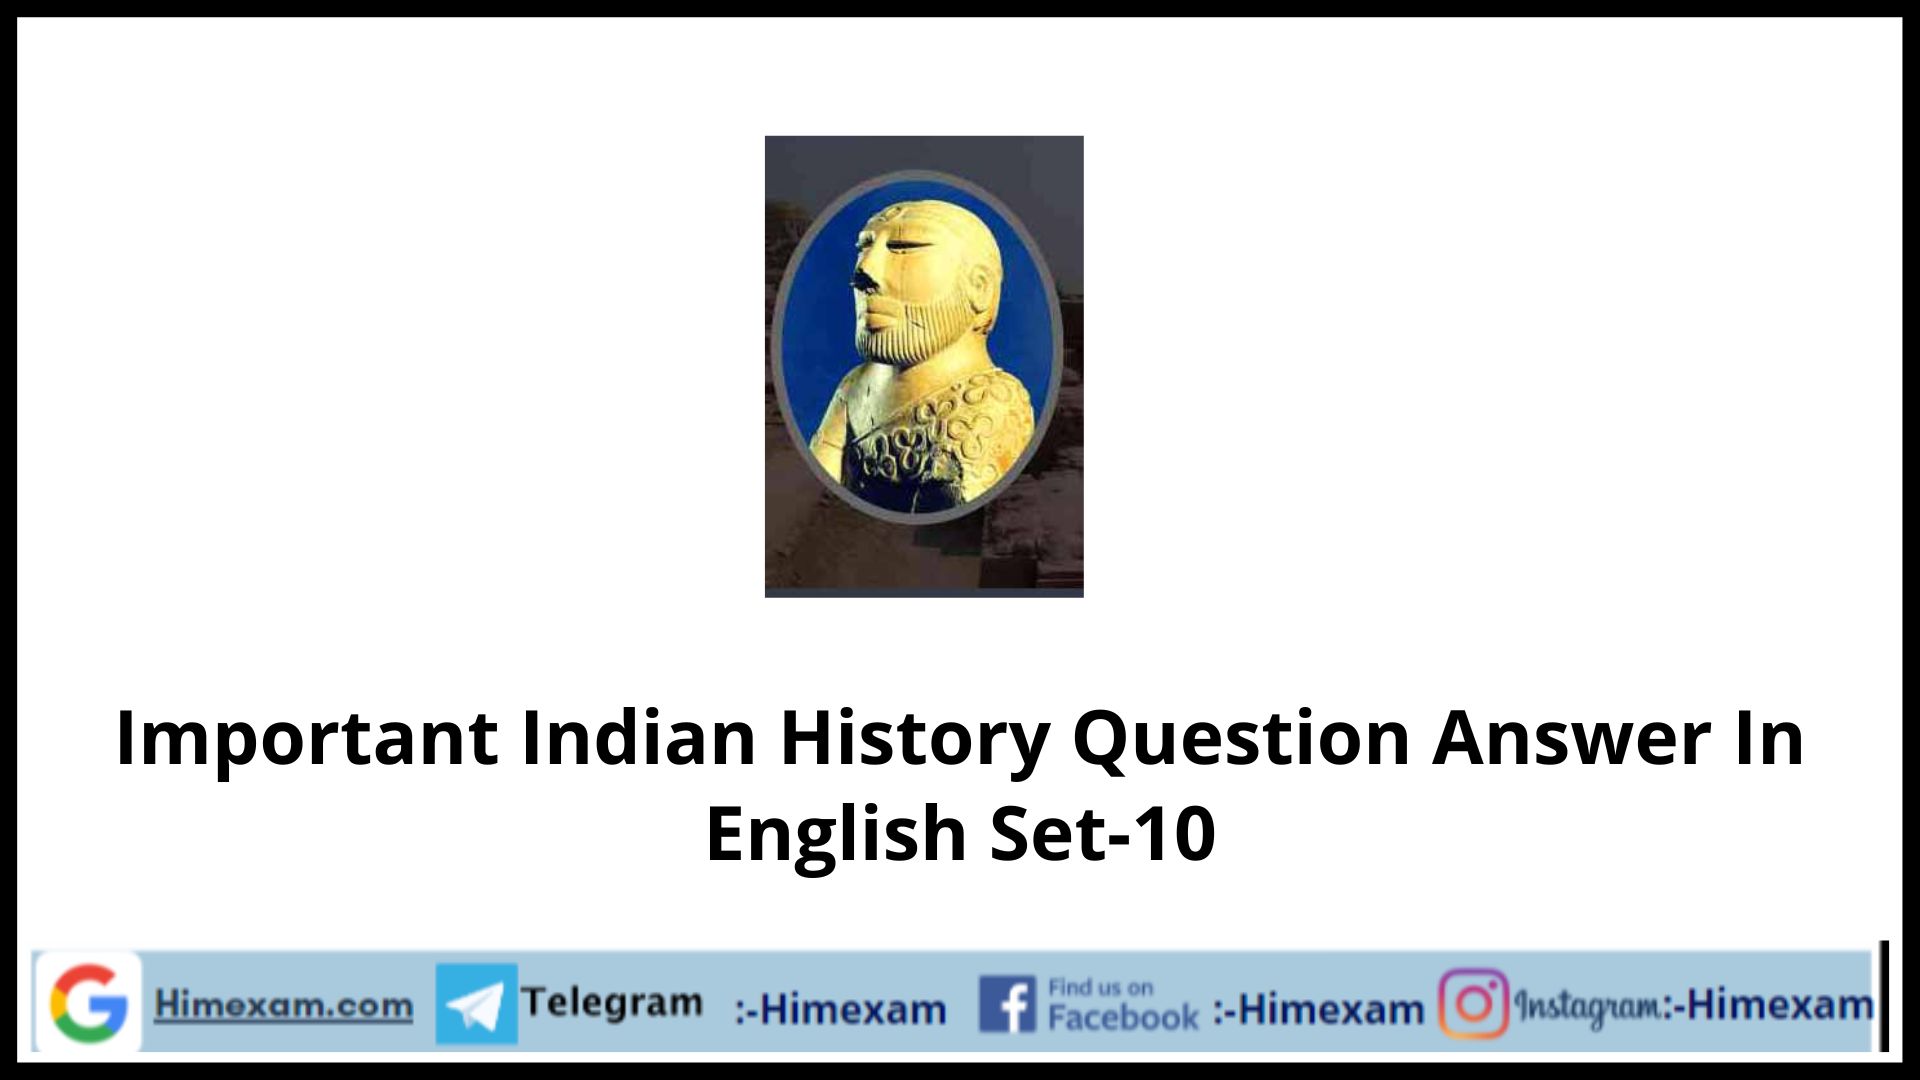 Important Indian History Question Answer In English Set-10